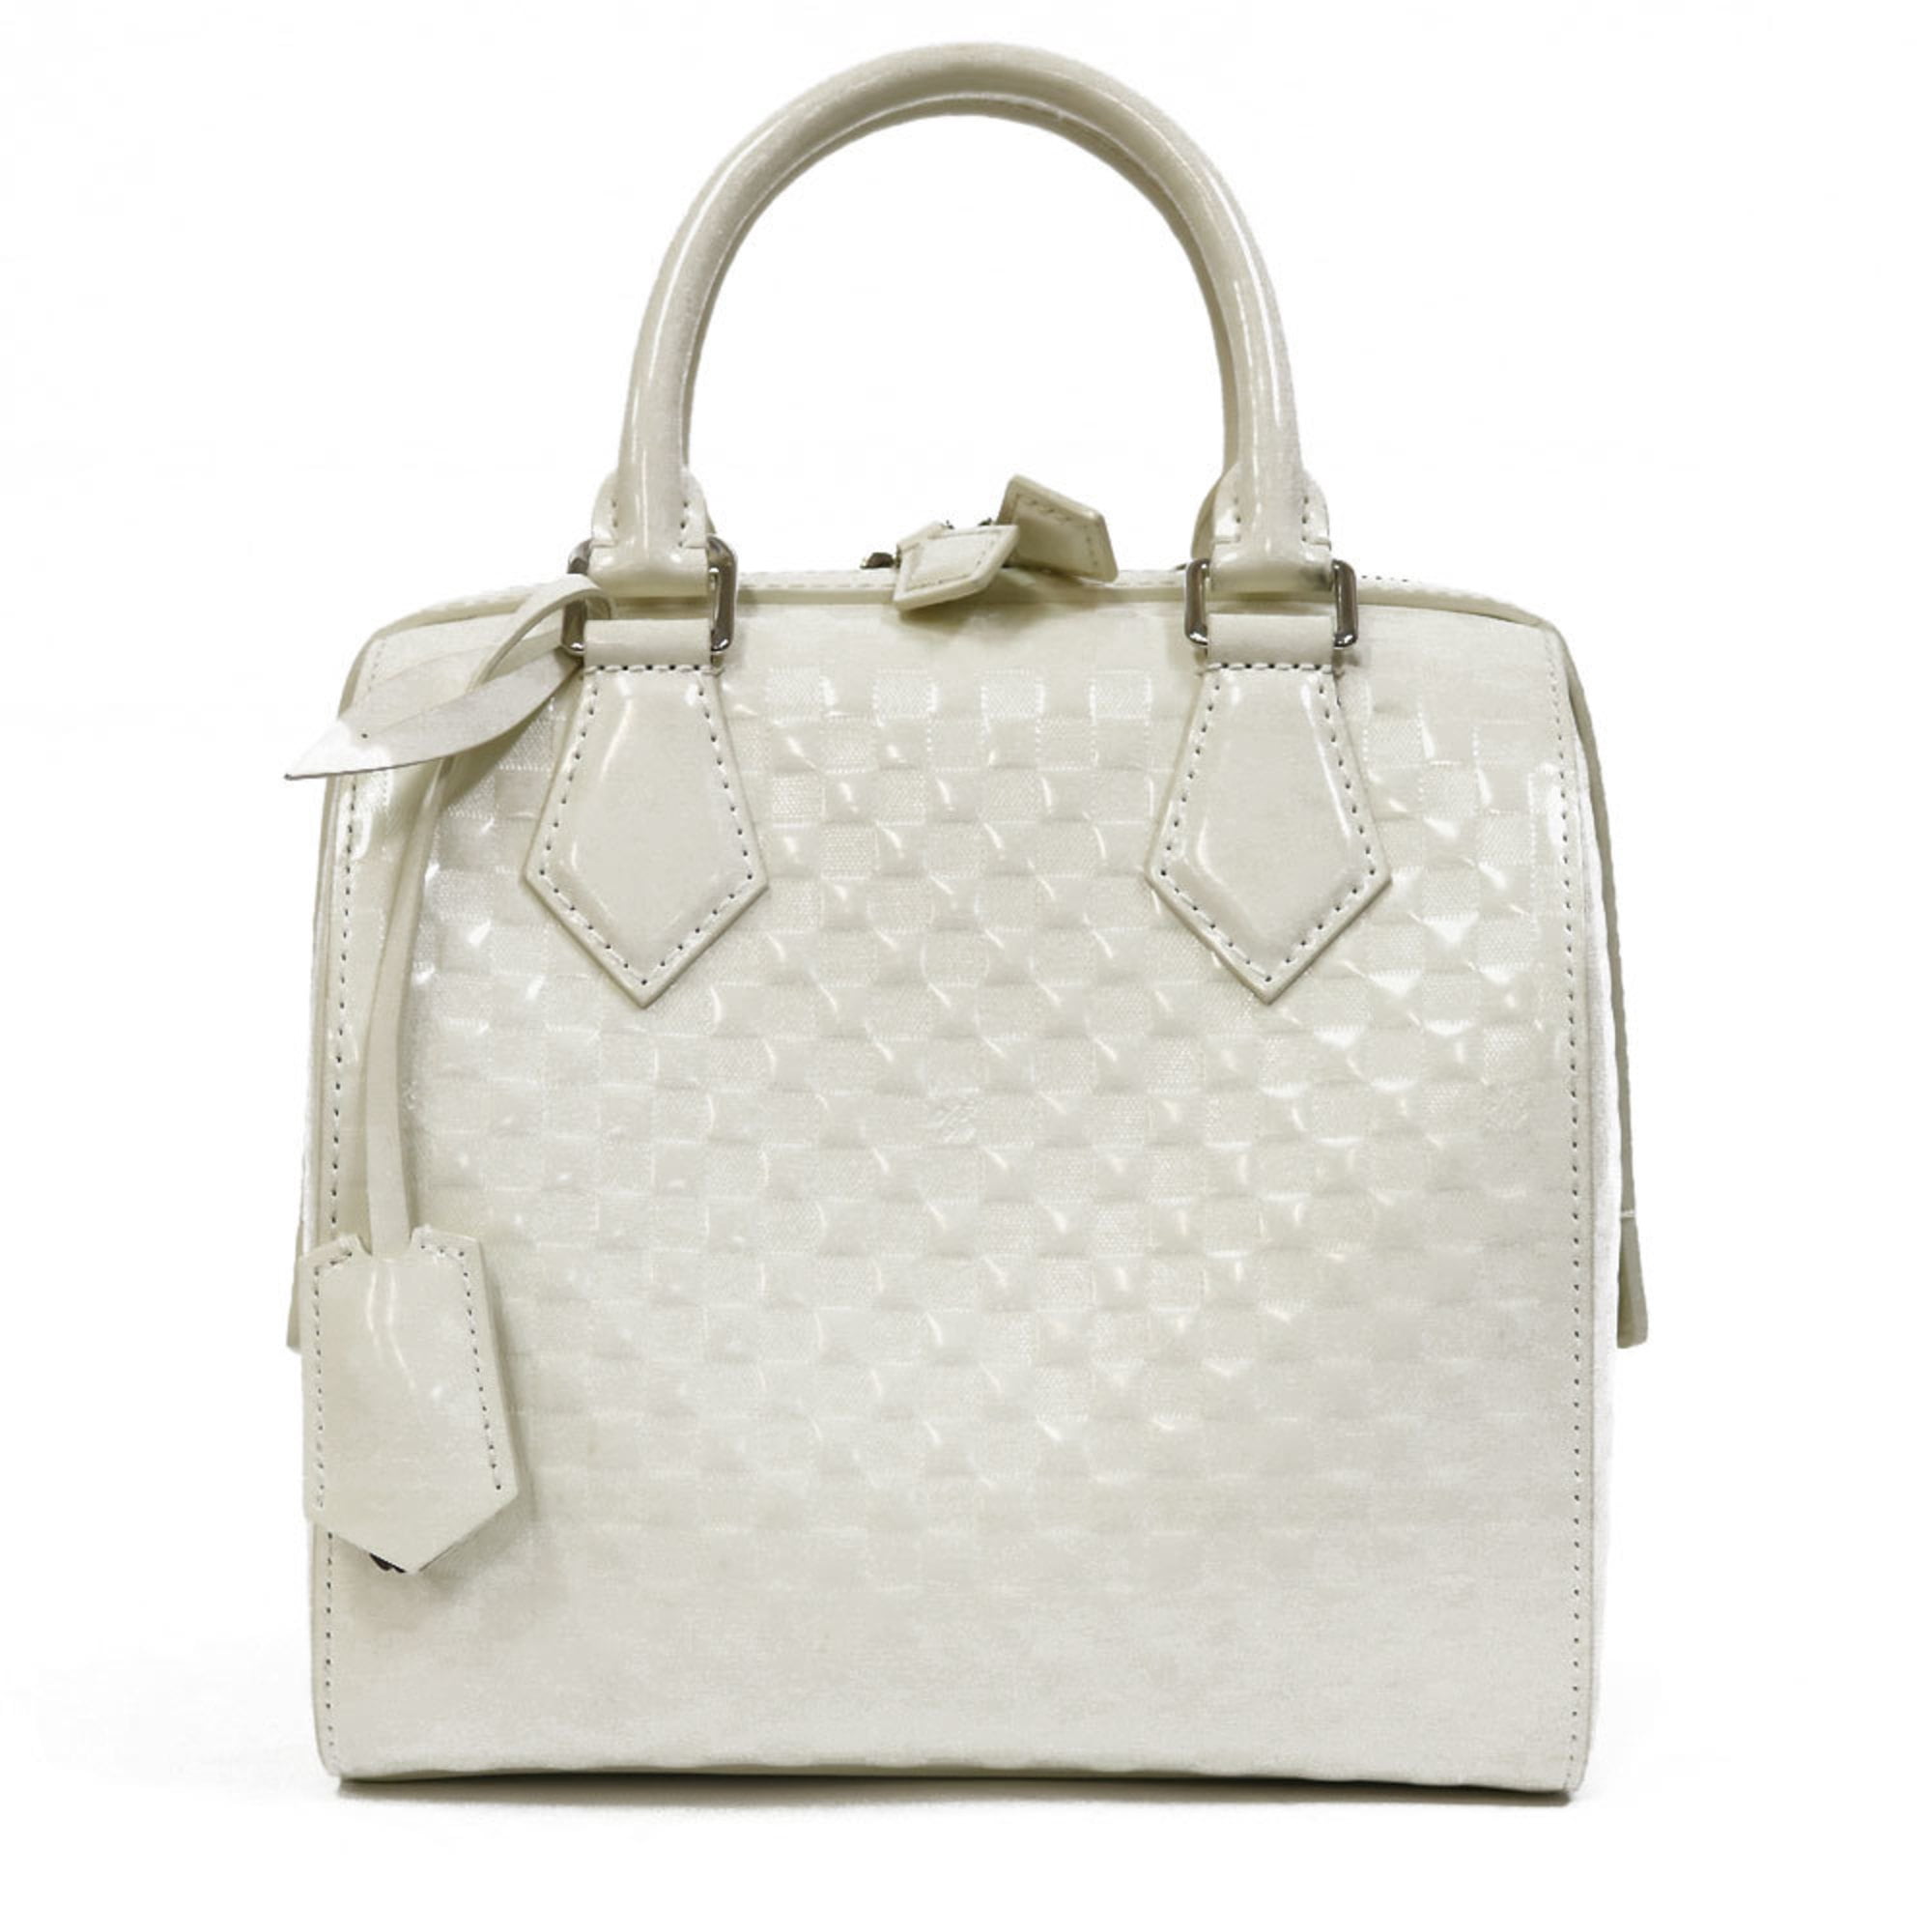 Louis Vuitton - Authenticated Speedy Handbag - Leather White for Women, Very Good Condition